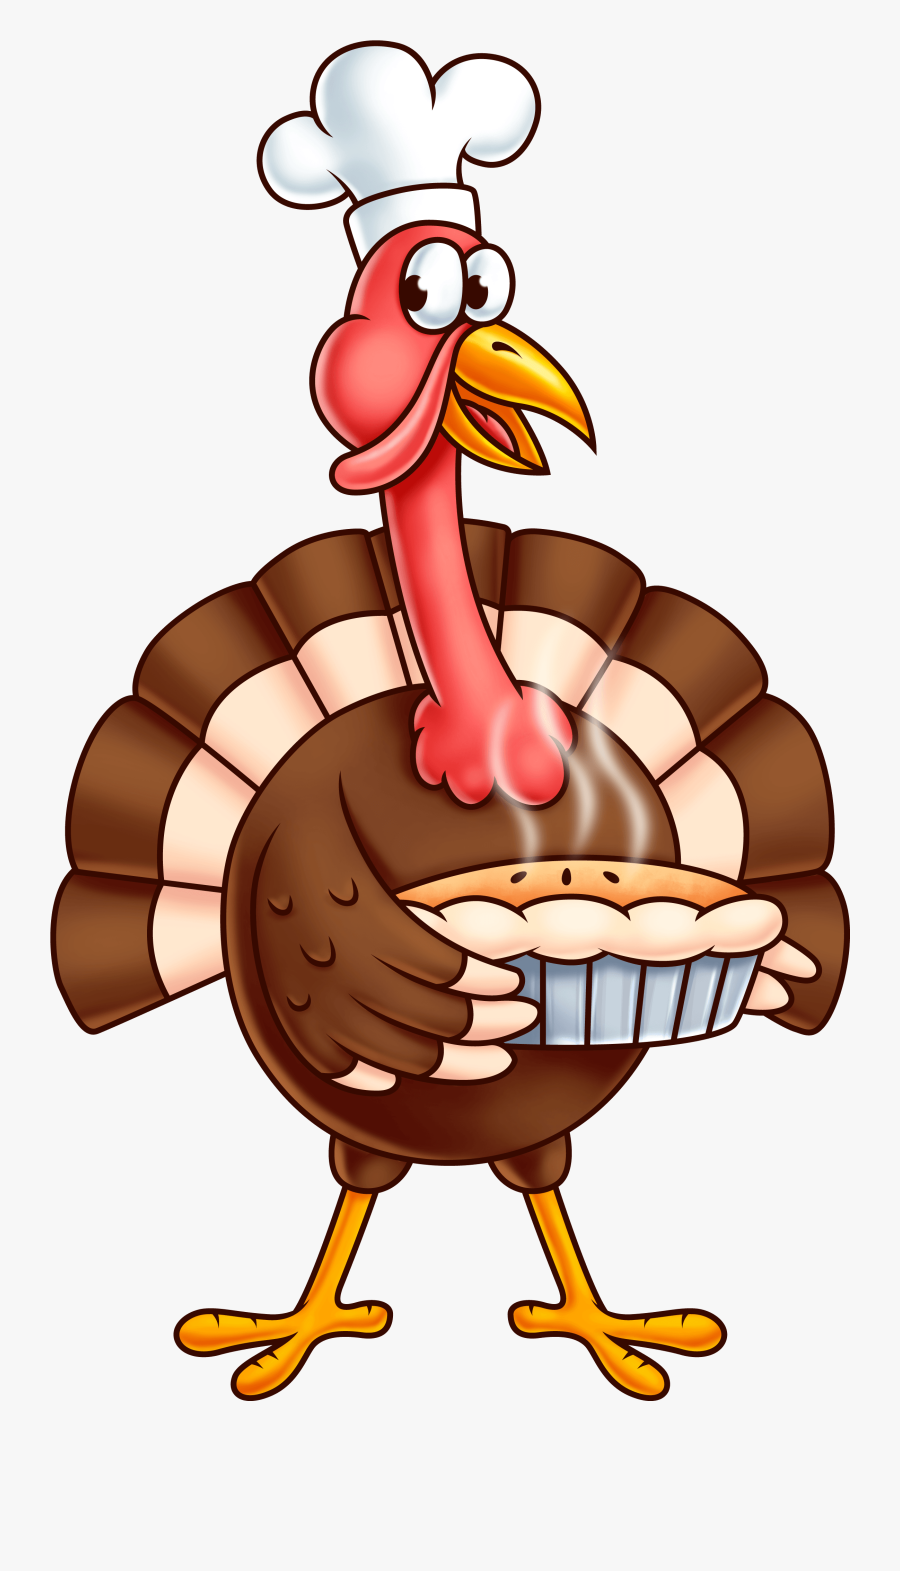 Thanksgiving Turkey Png Clipart Image - Thanksgiving Turkey Clipart, Transparent Clipart